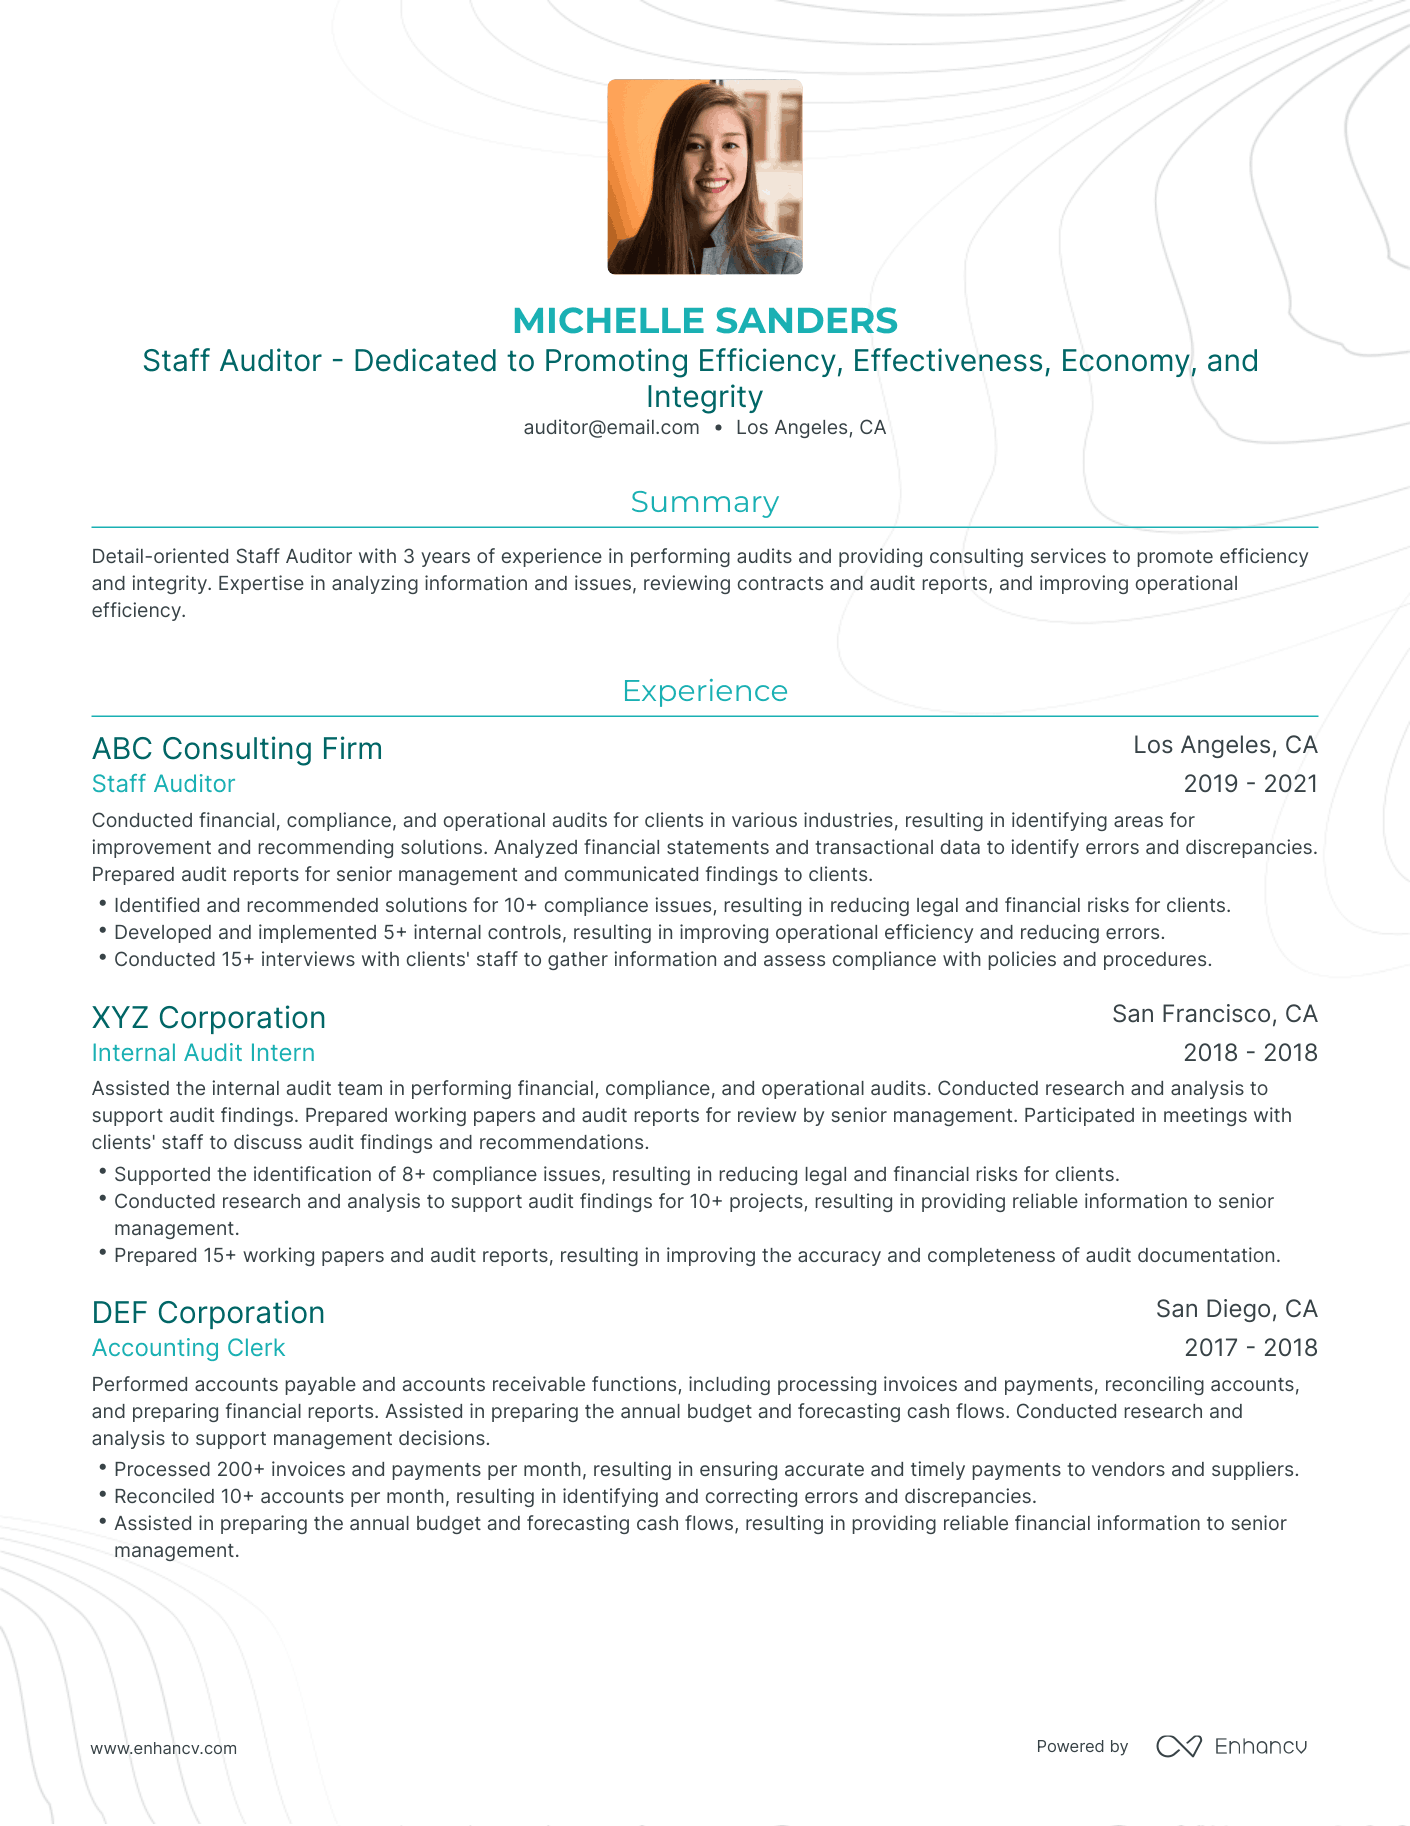 Traditional Staff Auditor Resume Template